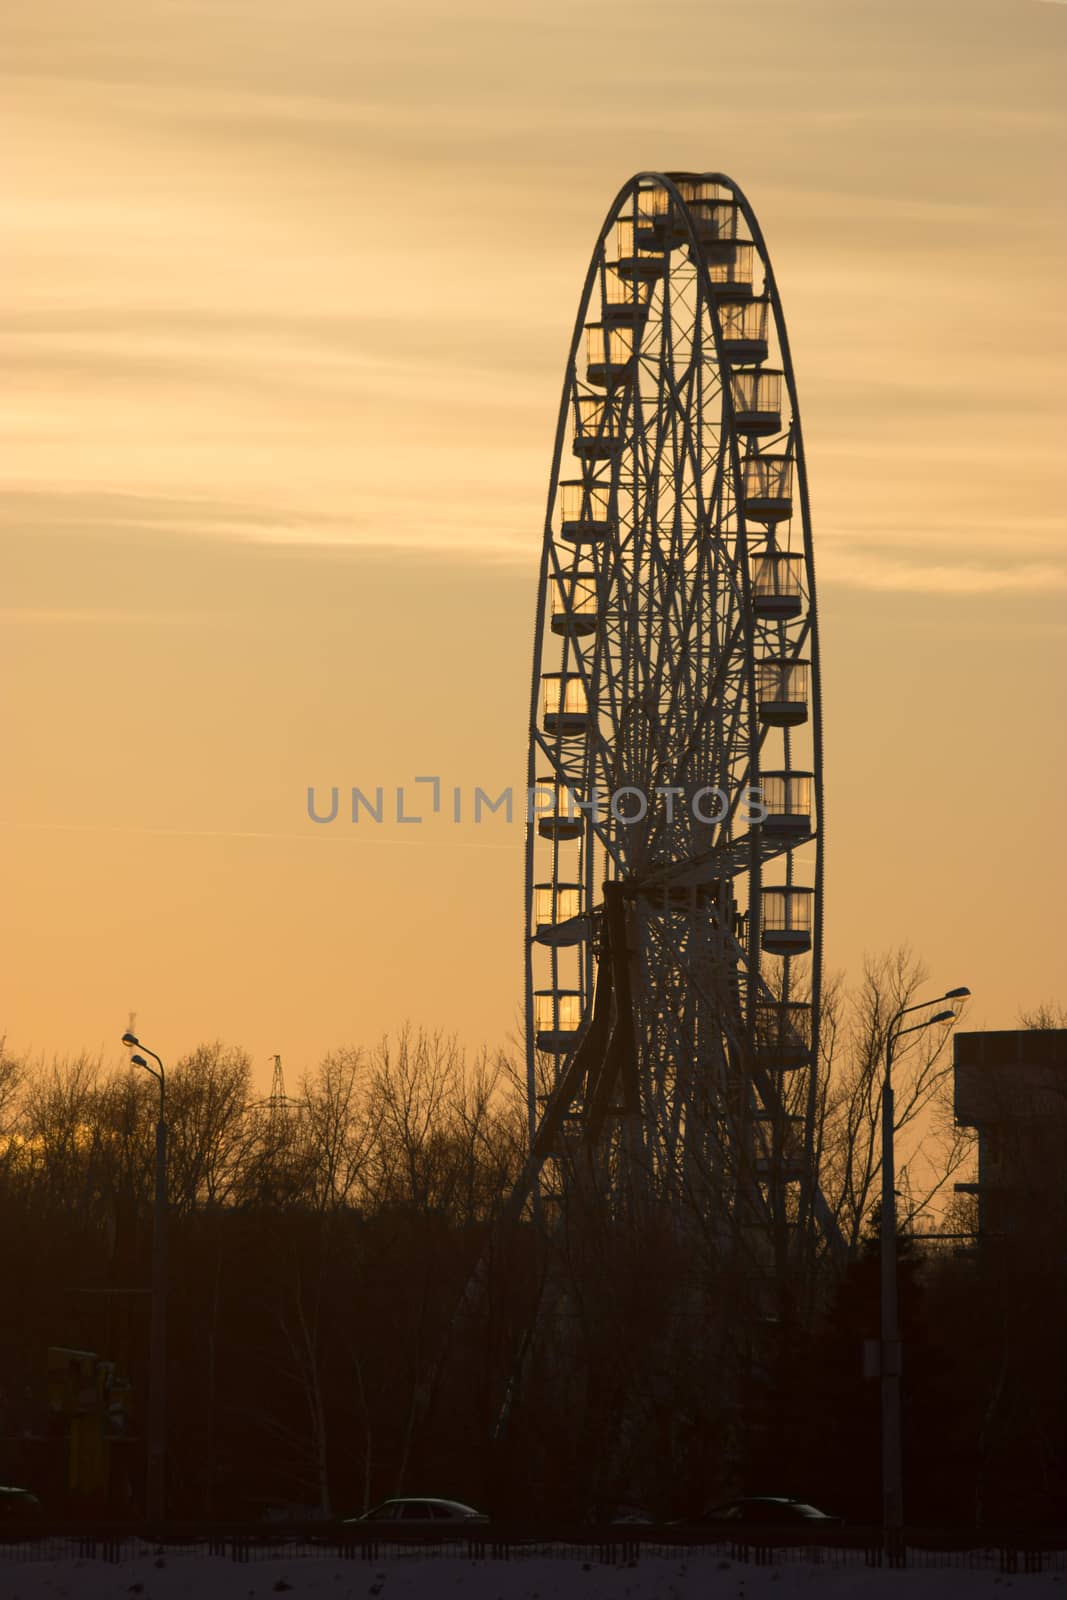 Silhouette of old ferris wheel at sunset in winter